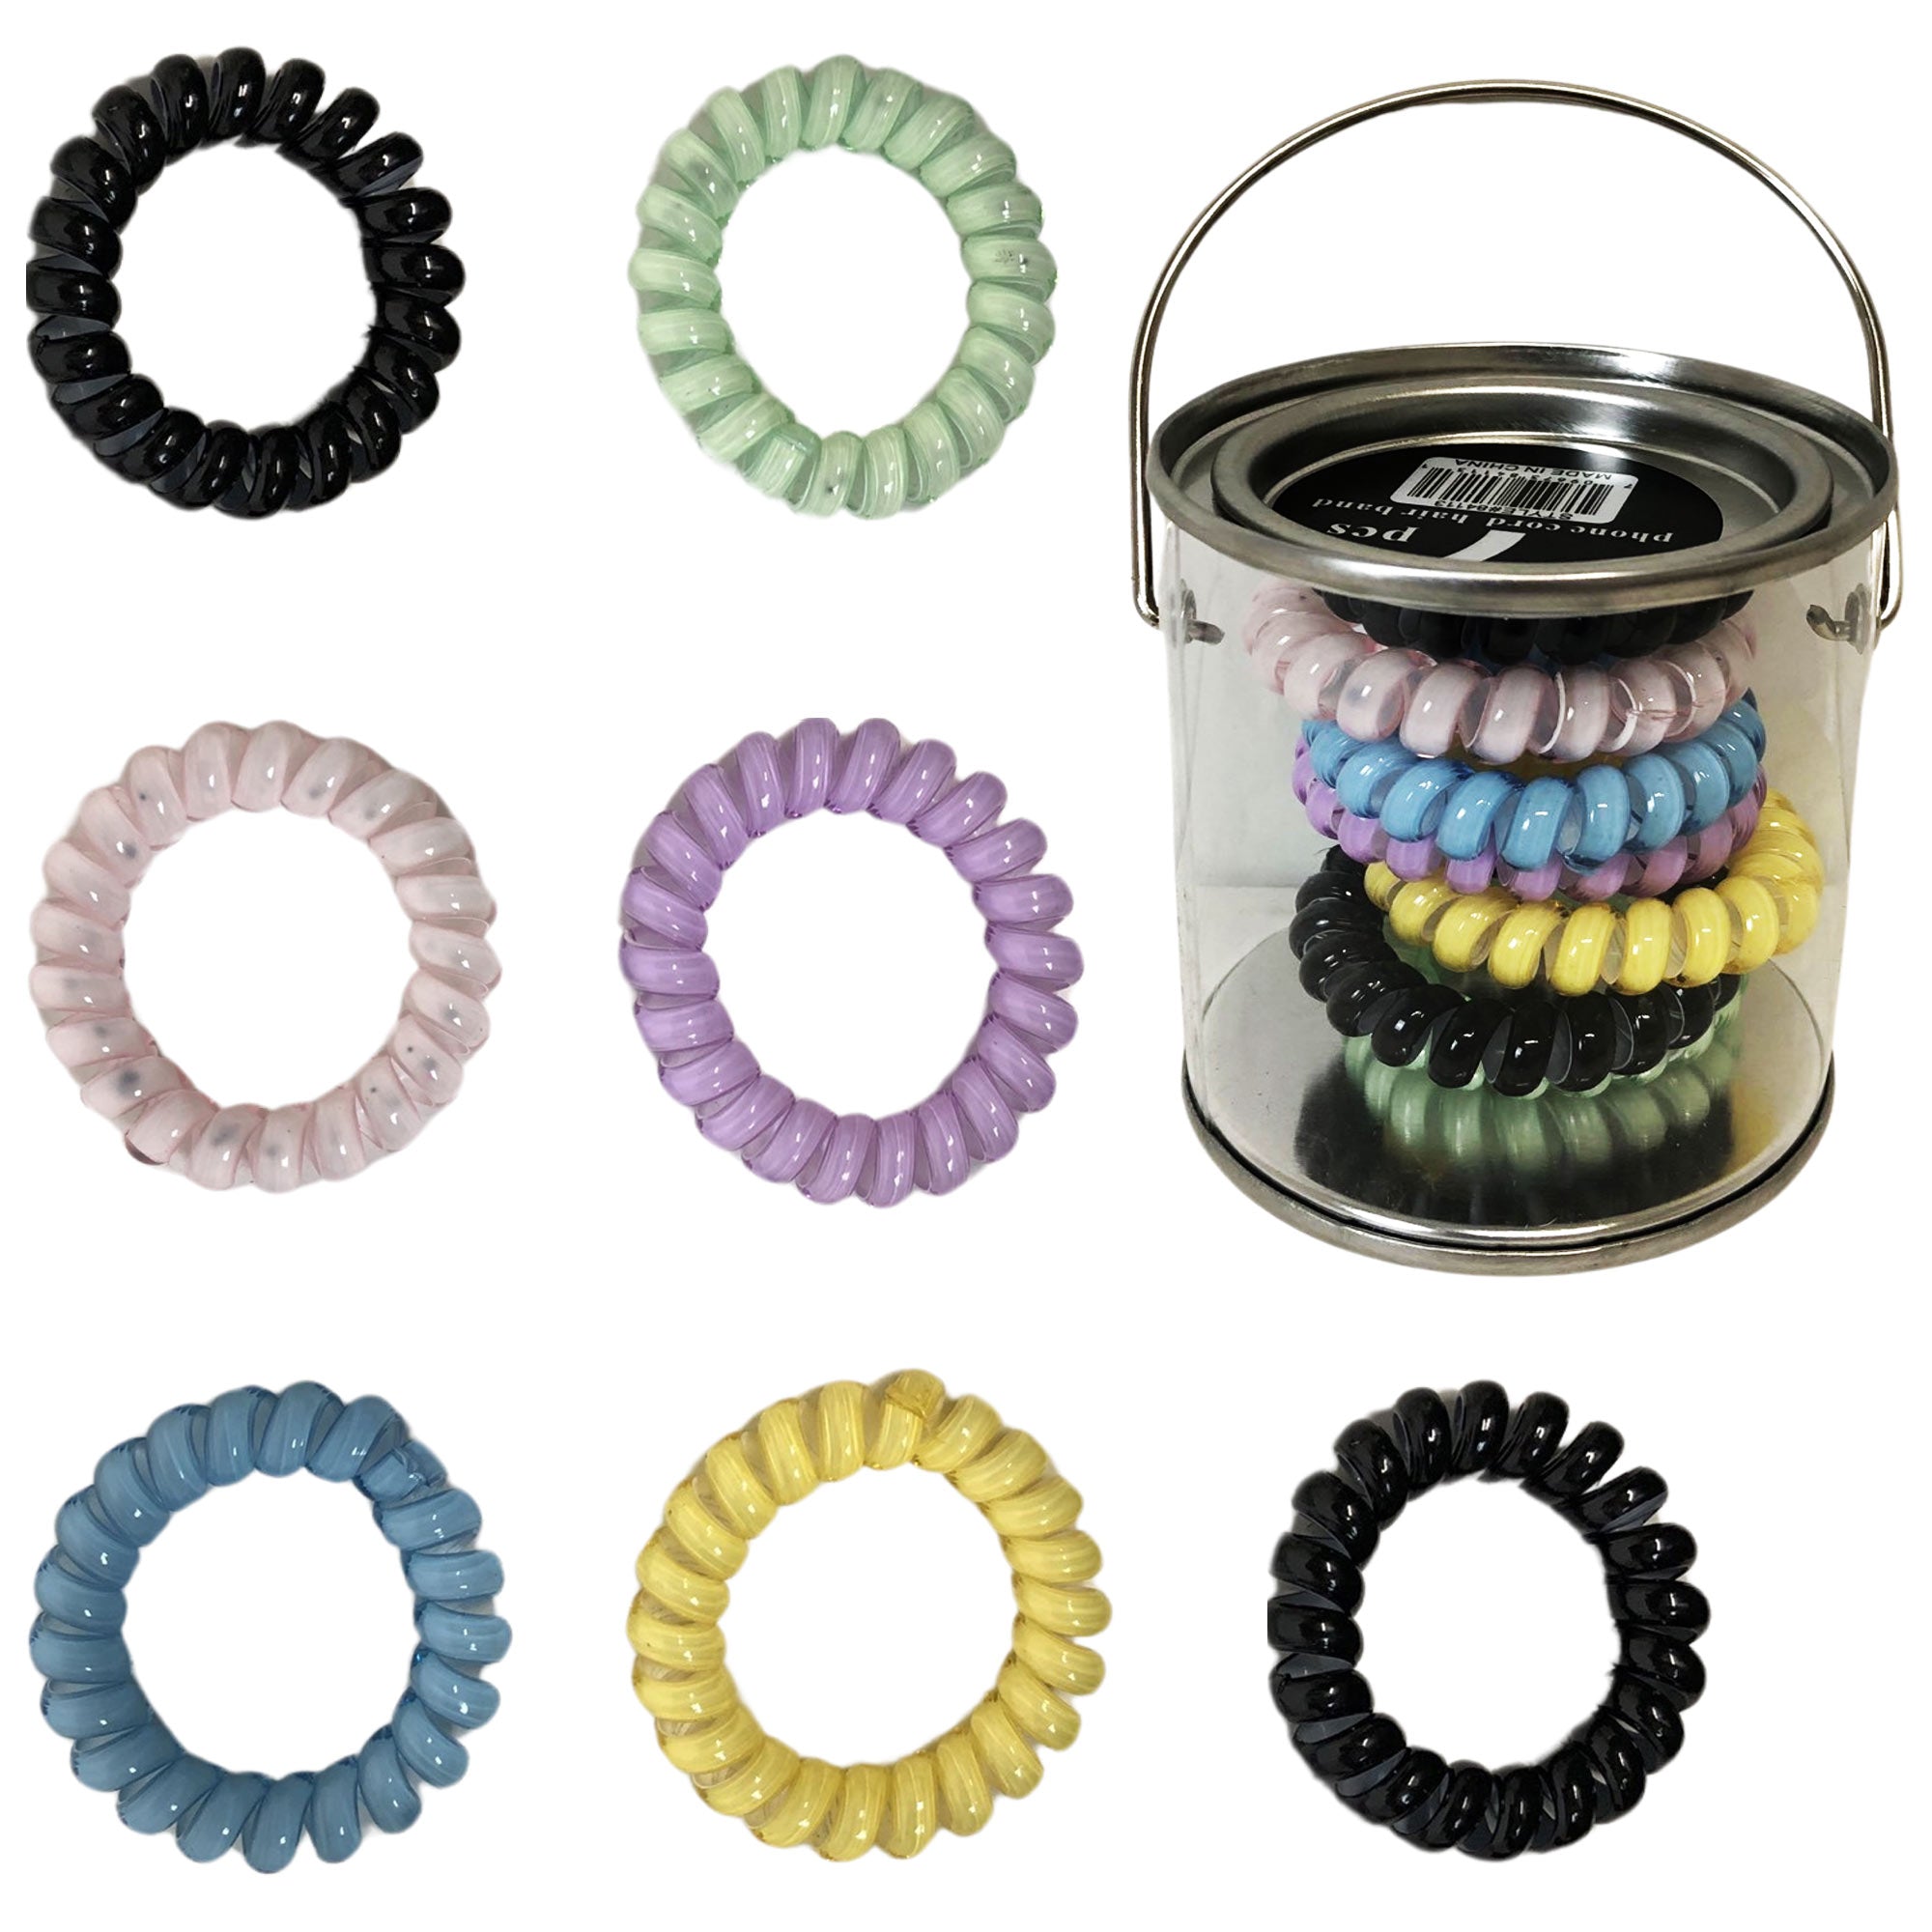 CLEARANCE CORDED HAIR TIES - 7 IN A CAN (CASE OF 36 - $2.00 / PIECE)  Wholesale Hair Ties in Assorted Colors SKU: 84113-36